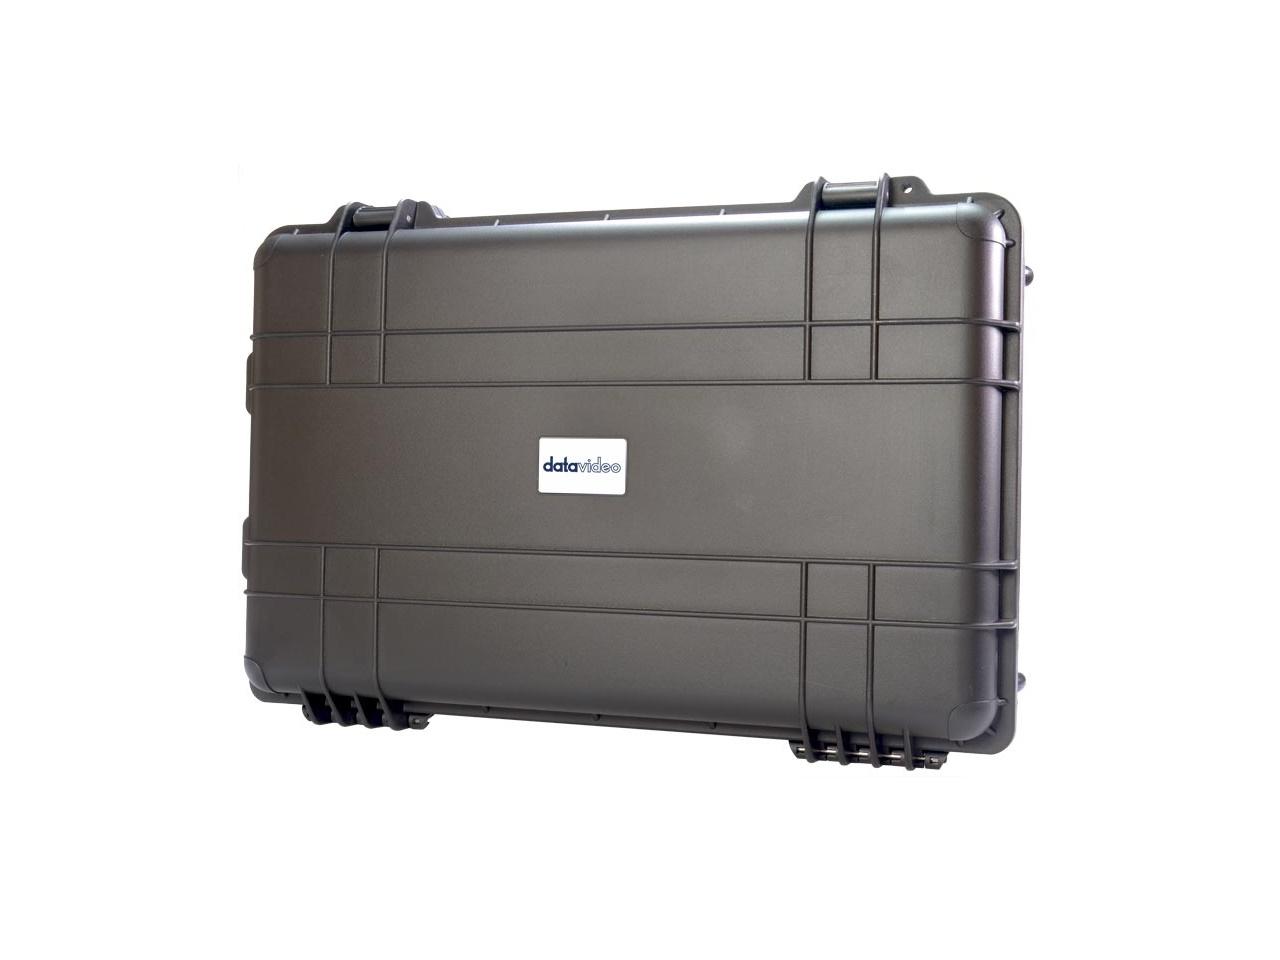 HC-800 Water/Dust and Crush Resistant Case/XXL/Trolley Style by Datavideo